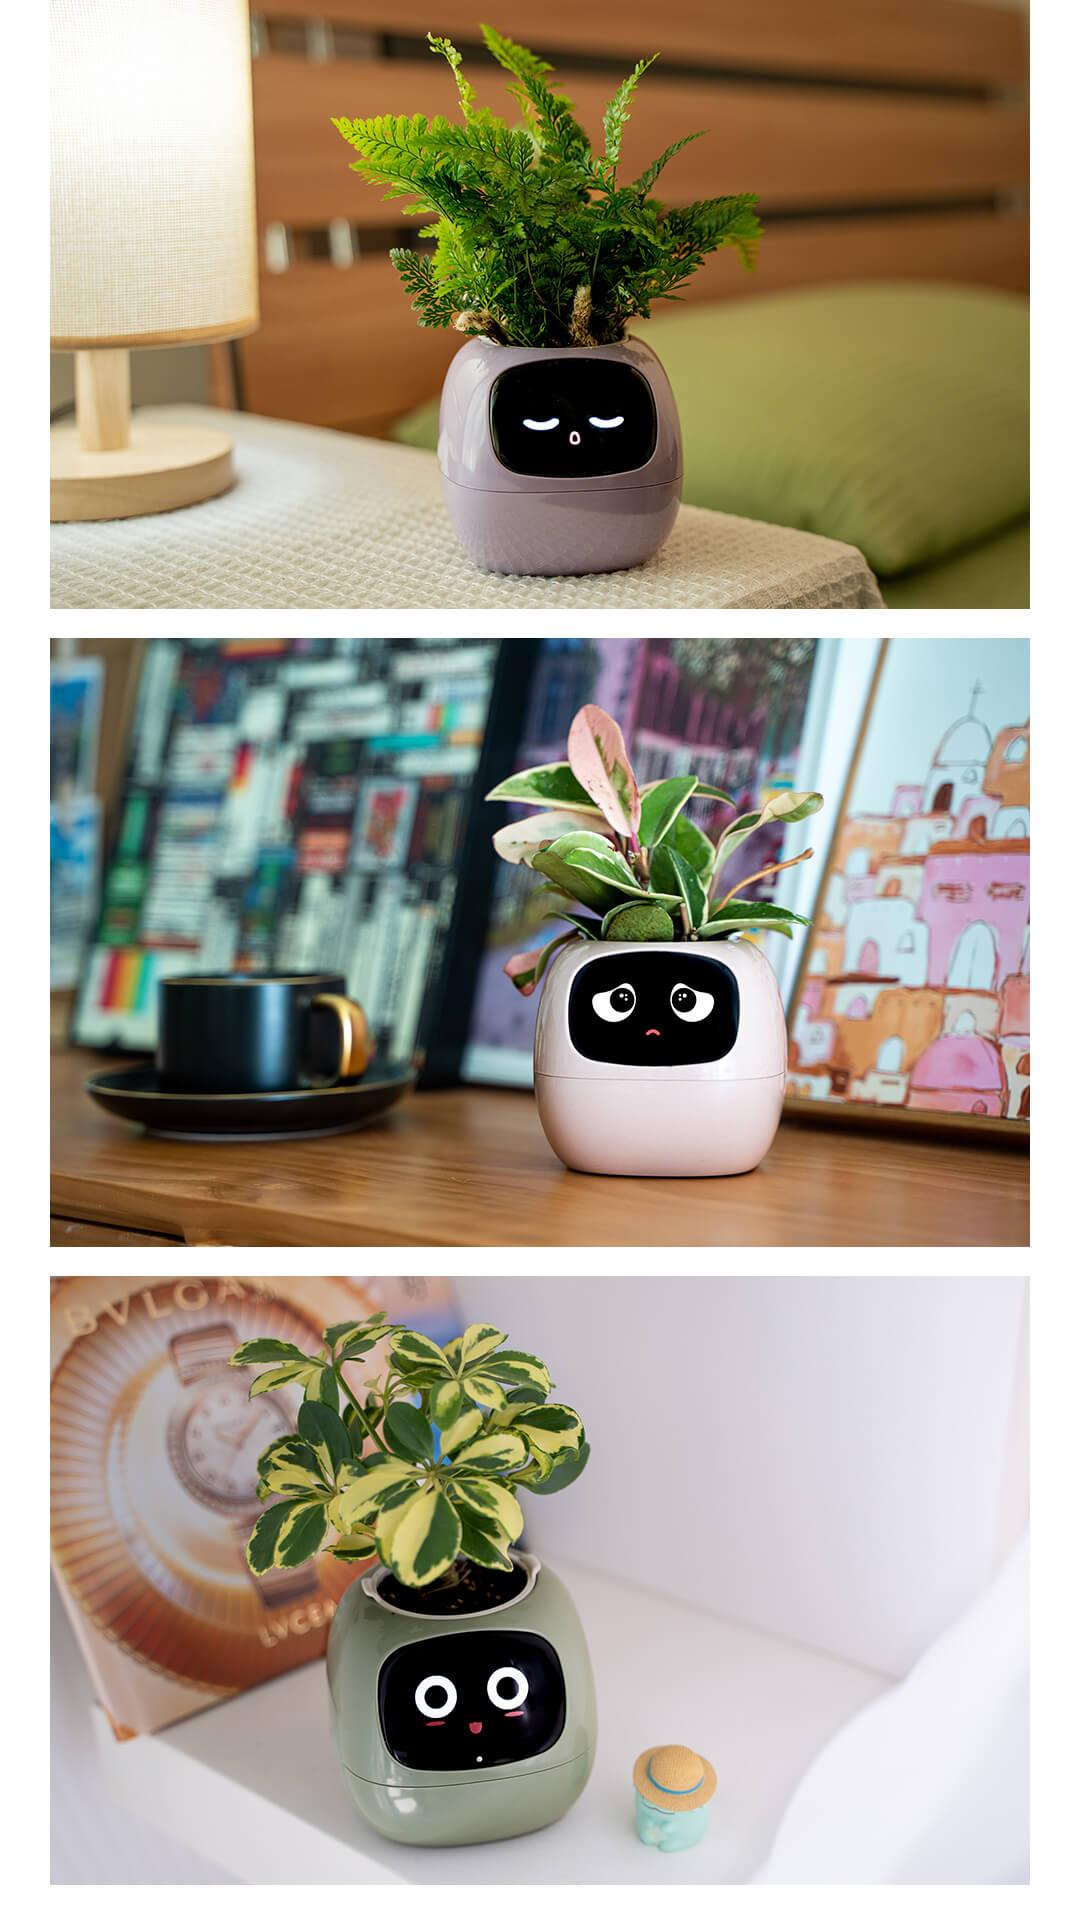 PLANTSIO Ivy interactive smart flowerpot with endless fun features8